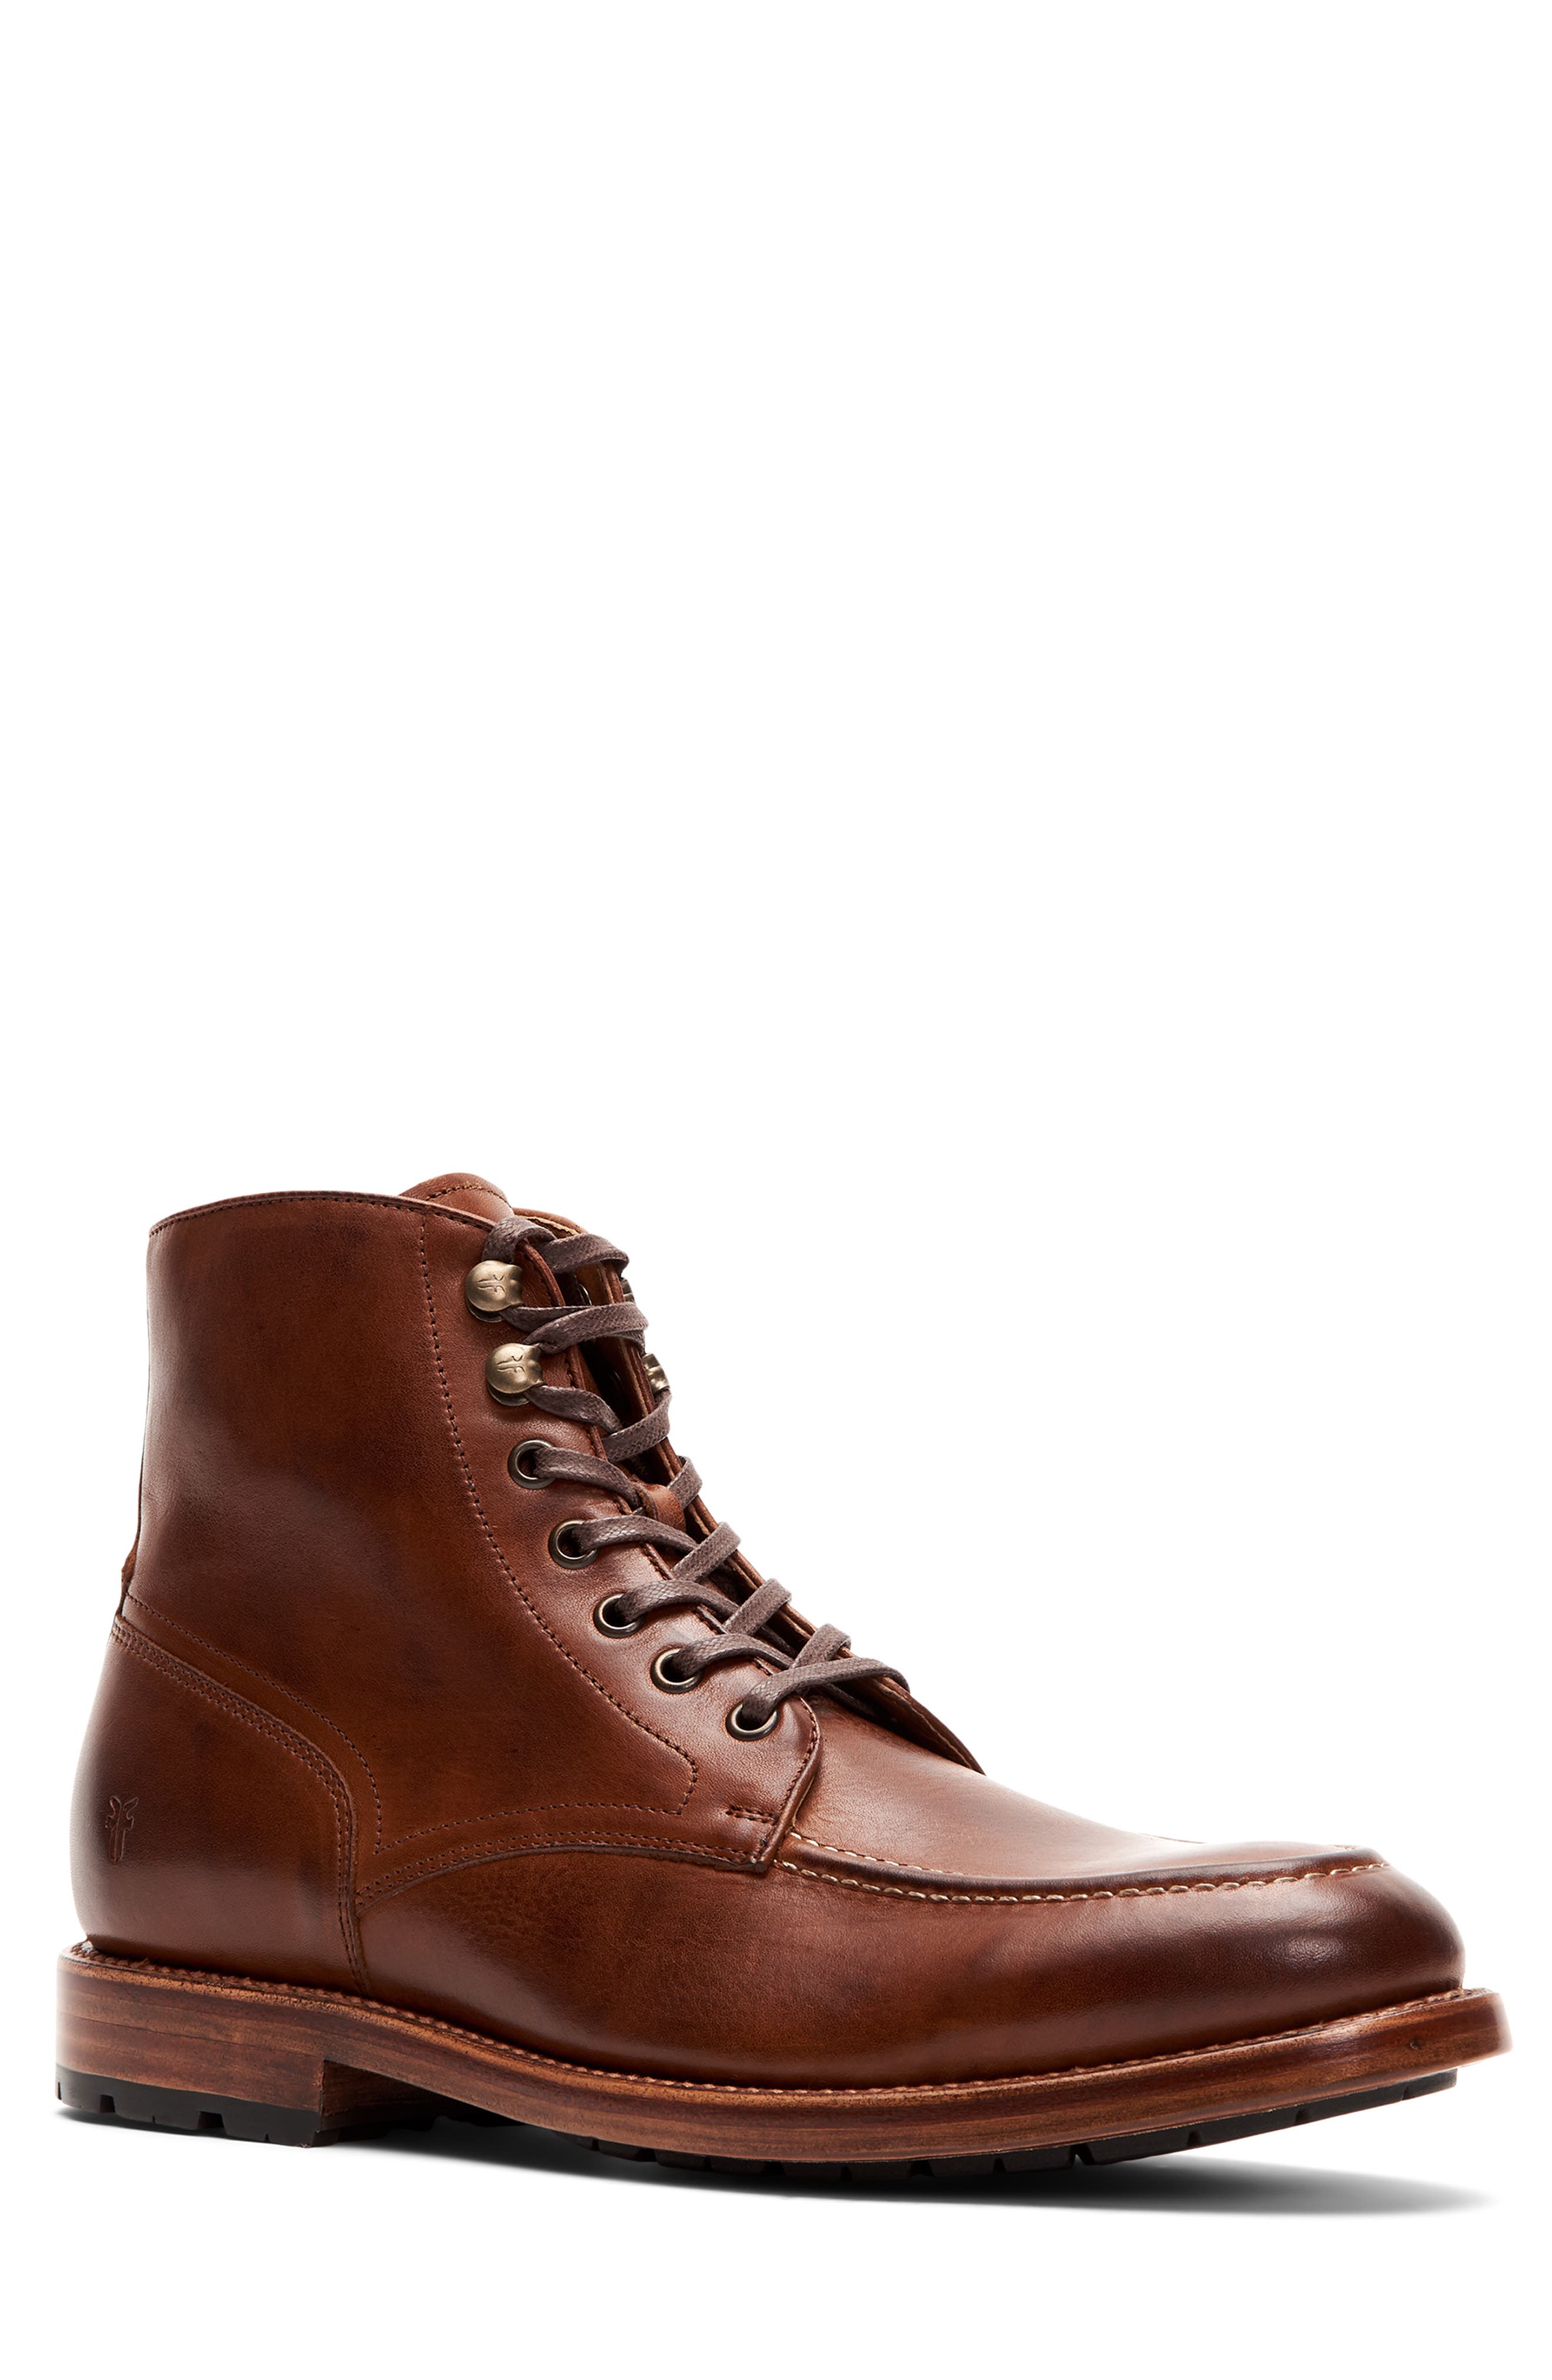 frye boots for men clearance